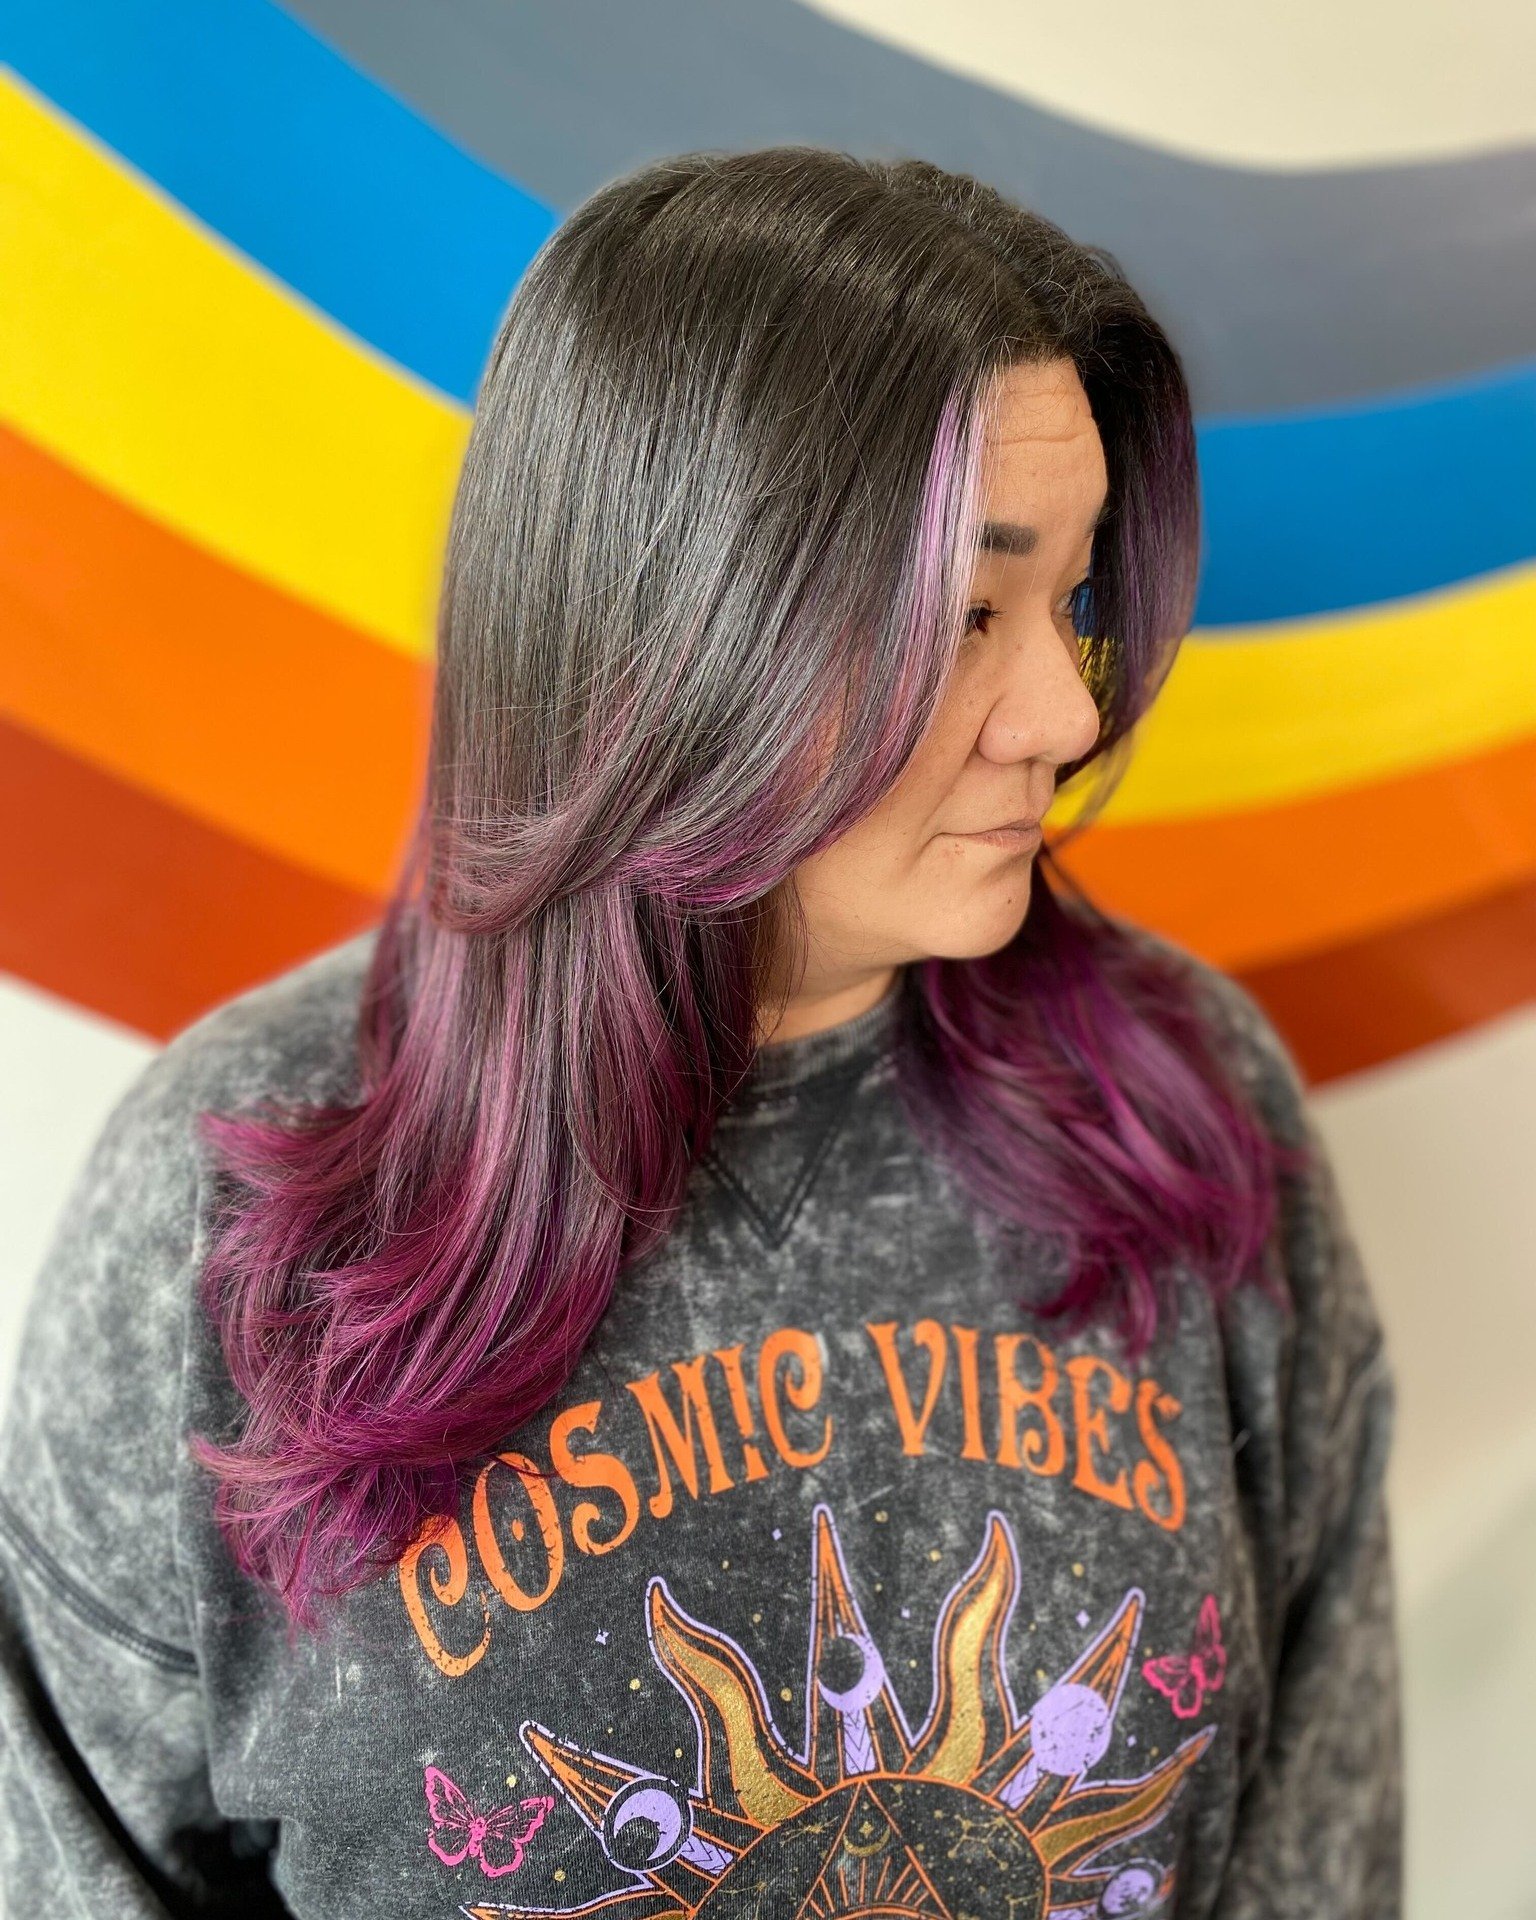 Cosmic vibes indeed 👽✌️💫 Layered haircut by McKenzie @oak_city_styles_95 

 #davinessalon #ncstylist #hairundone #wakeforest #haircutspecialist #haircuttingspecialist #raleighstylist #wakeforestnc #hairstylistwakeforest #hairsalonwakeforest #919hai